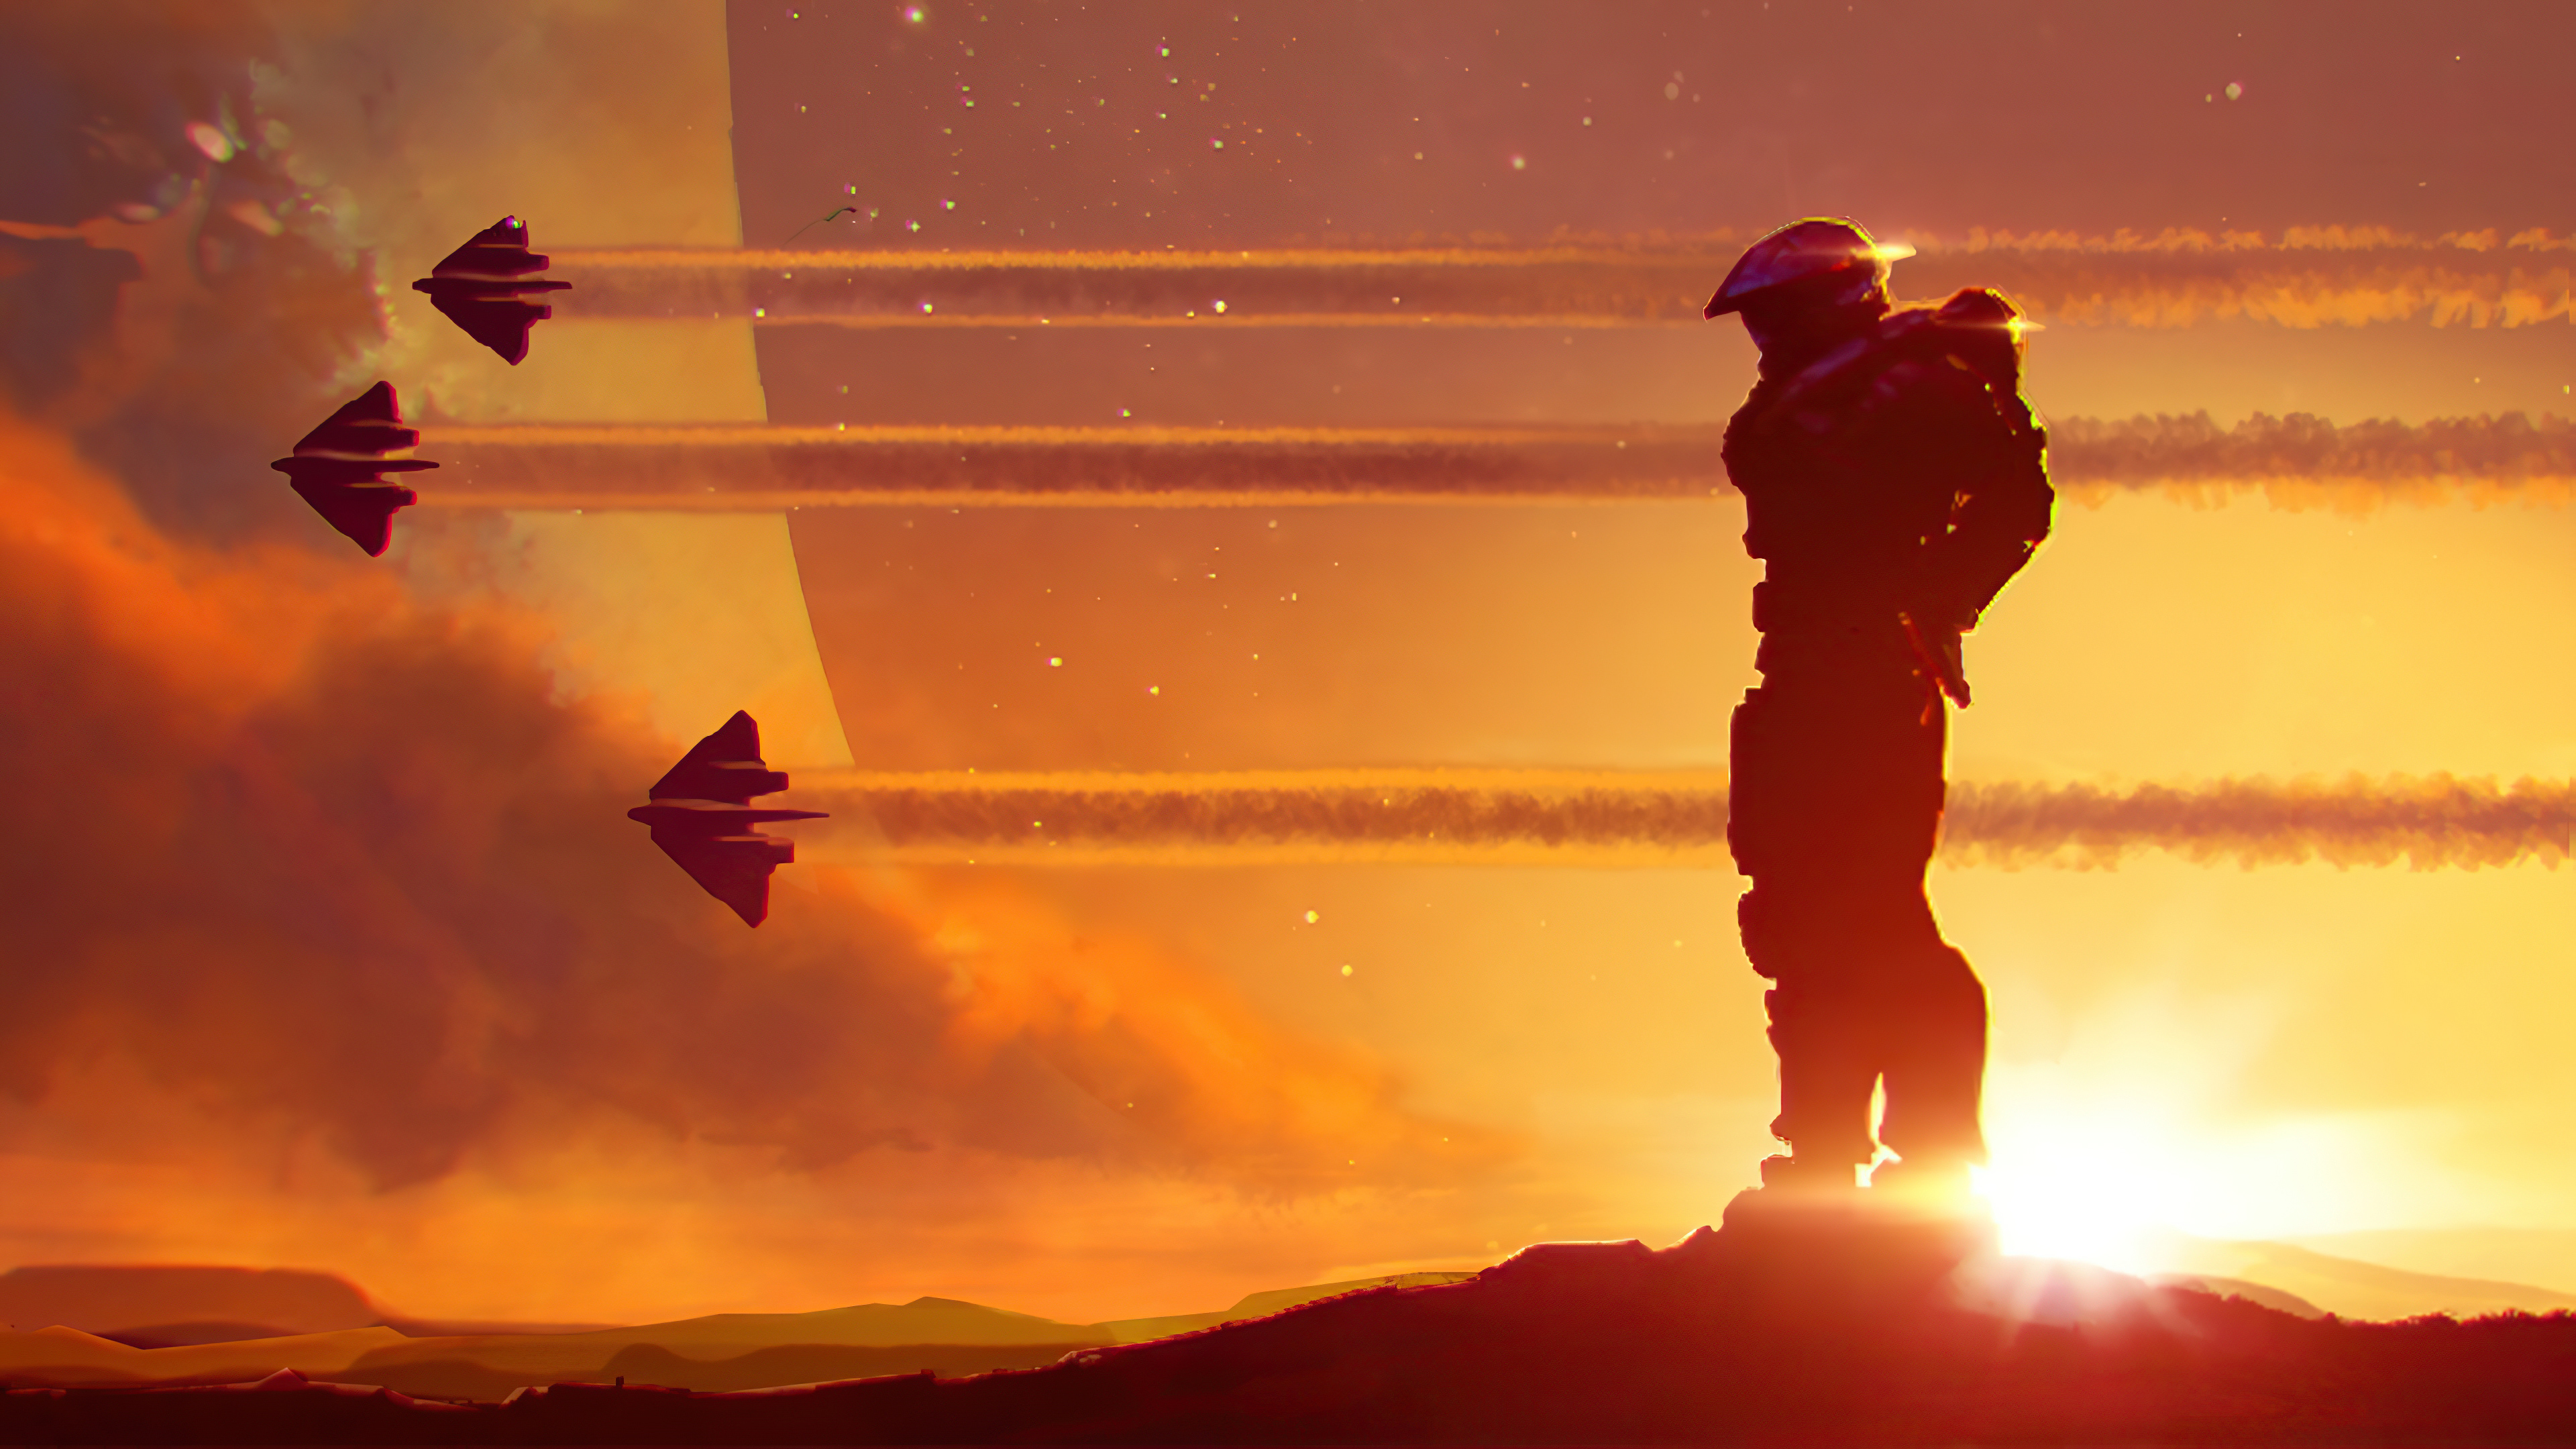 Halo 2020 Wallpapers